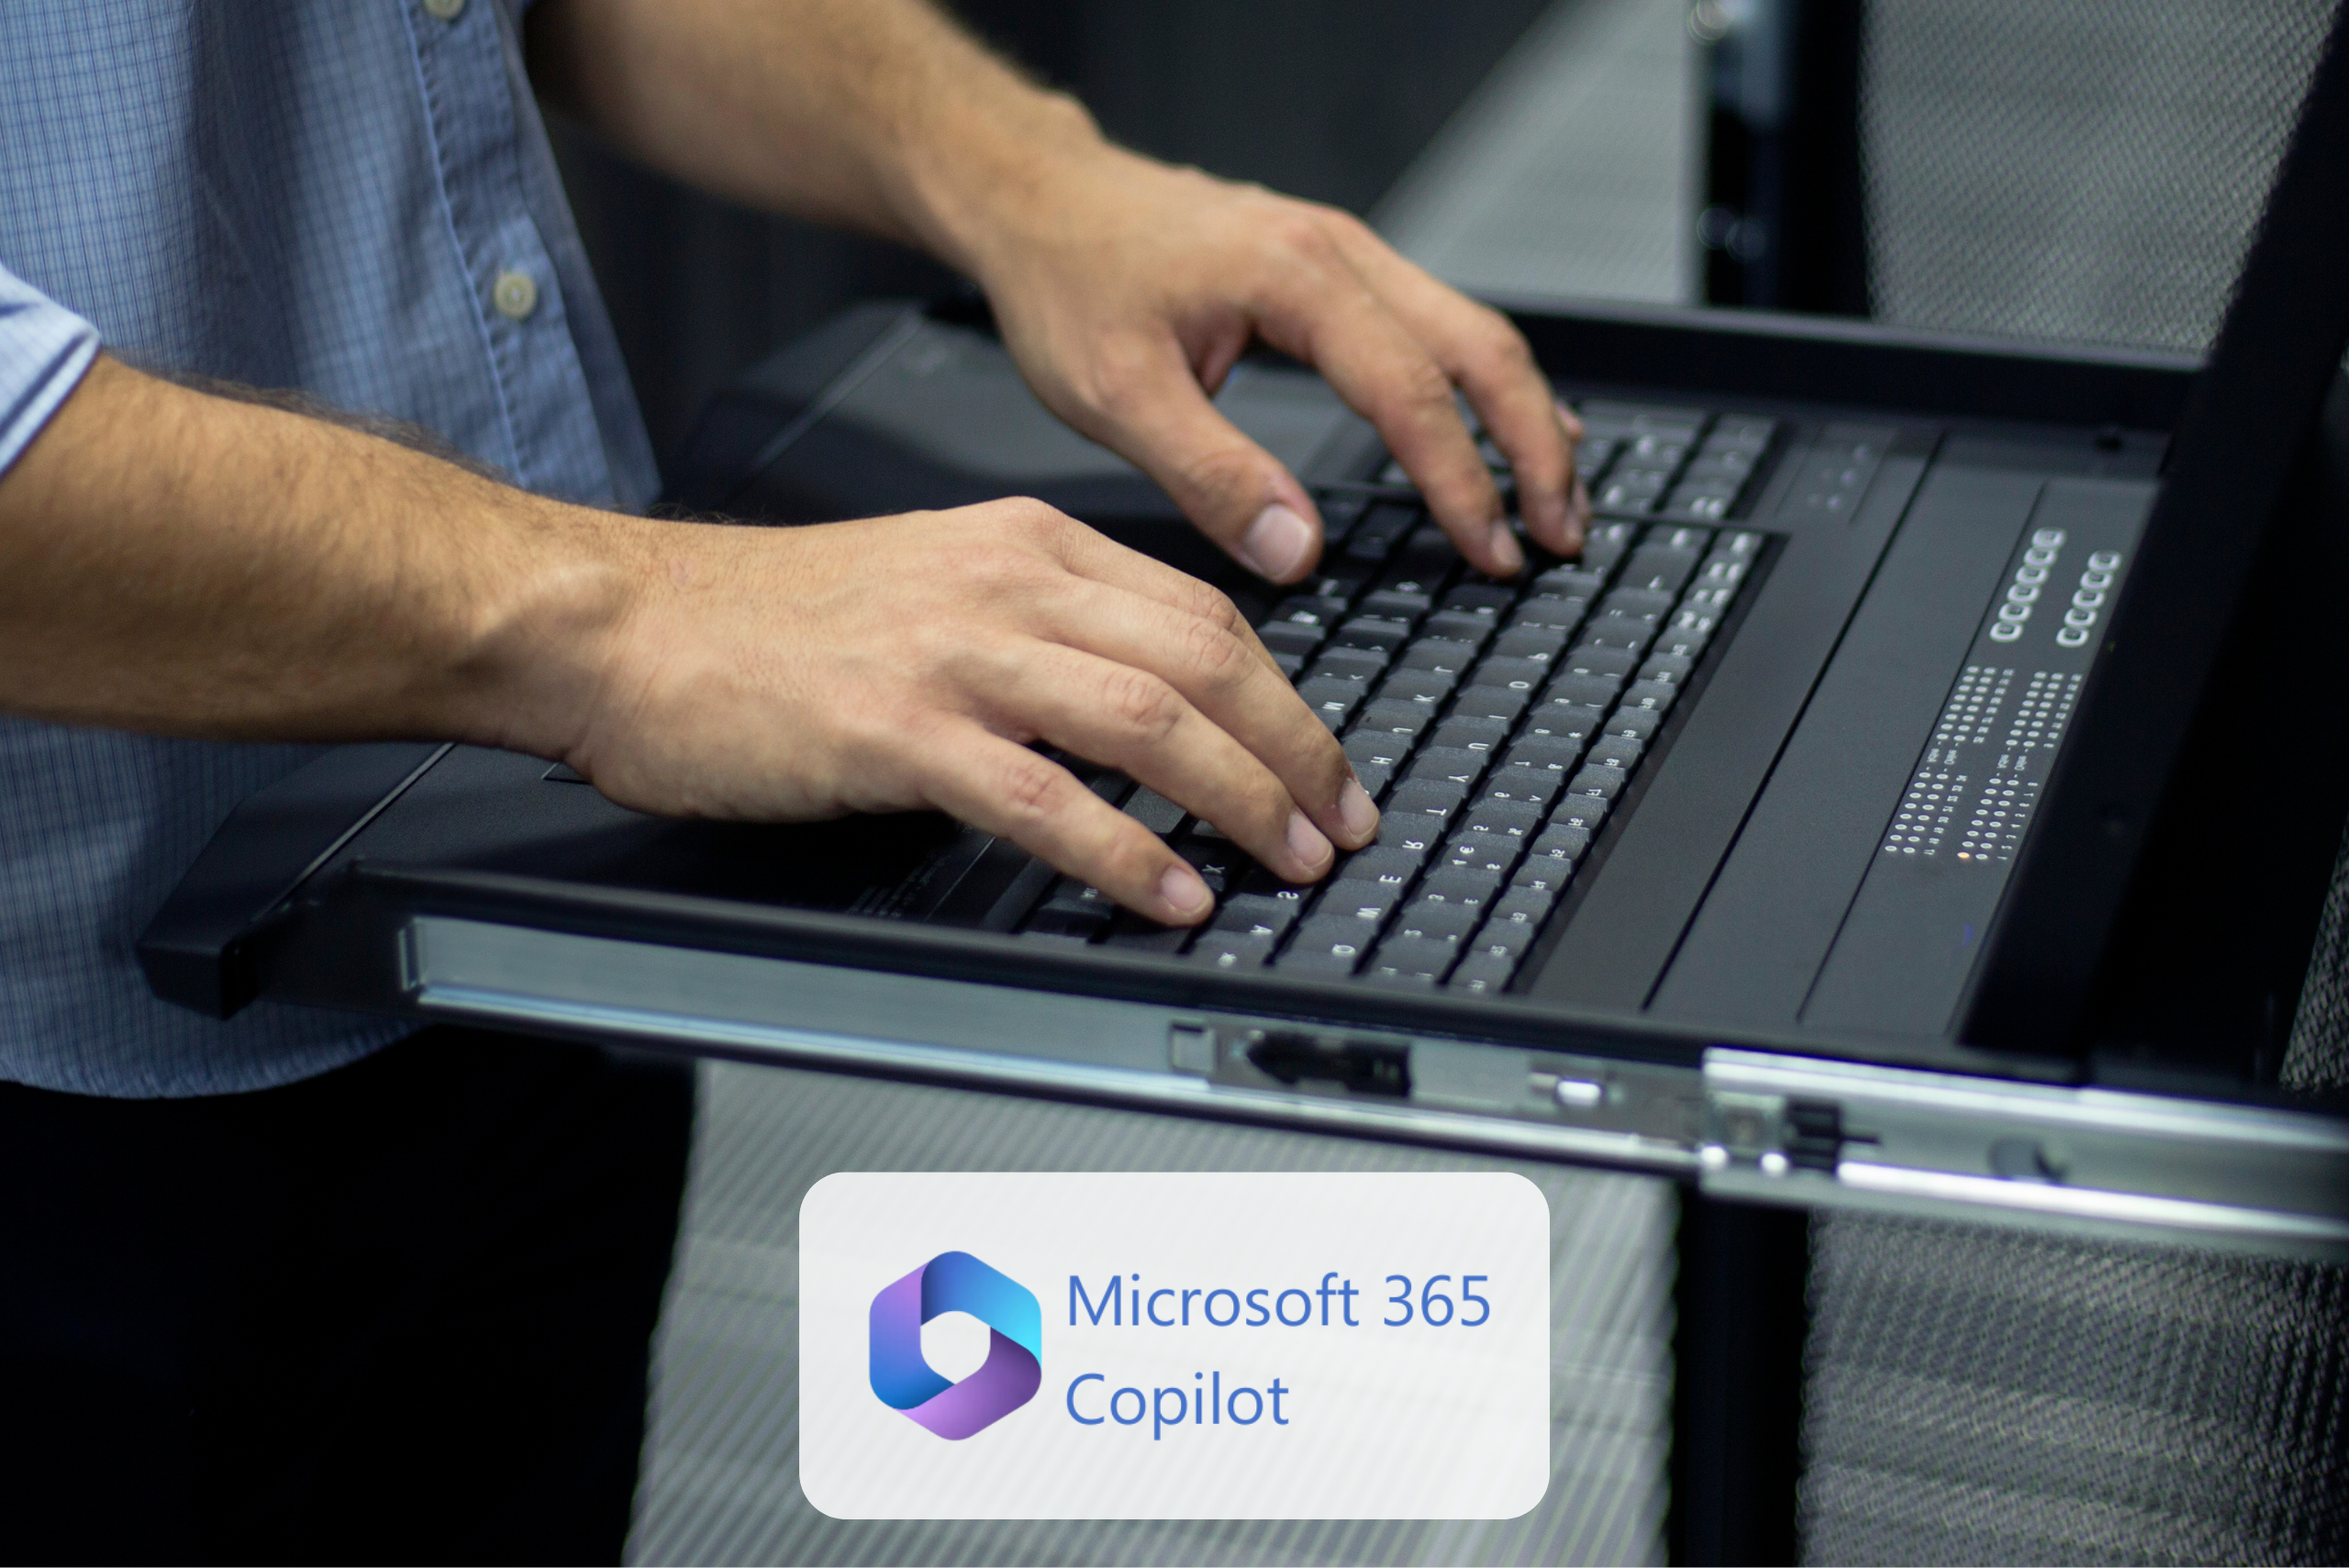 Male hands typing on a laptop with the Copilot logo below.